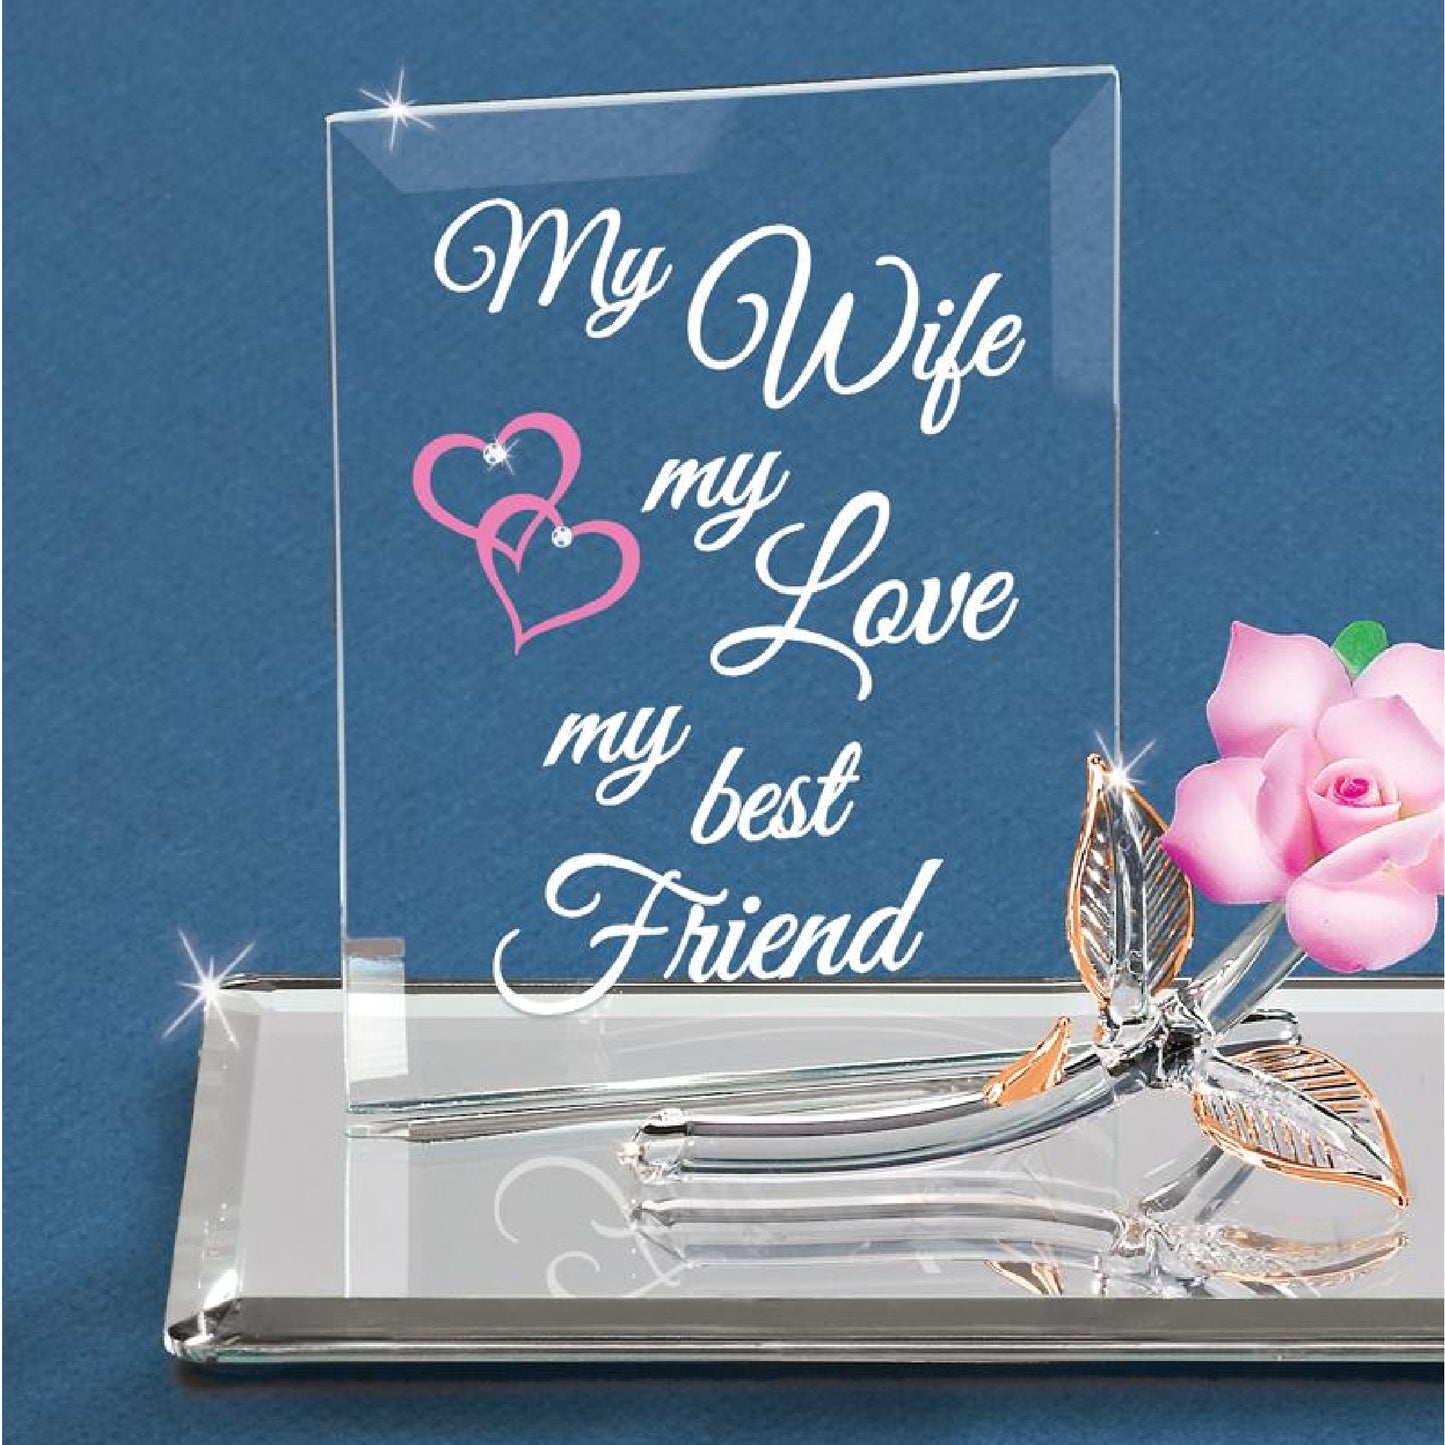 Glass Baron "My Wife, My Best friend" with Pink Rose Figurine Plaque